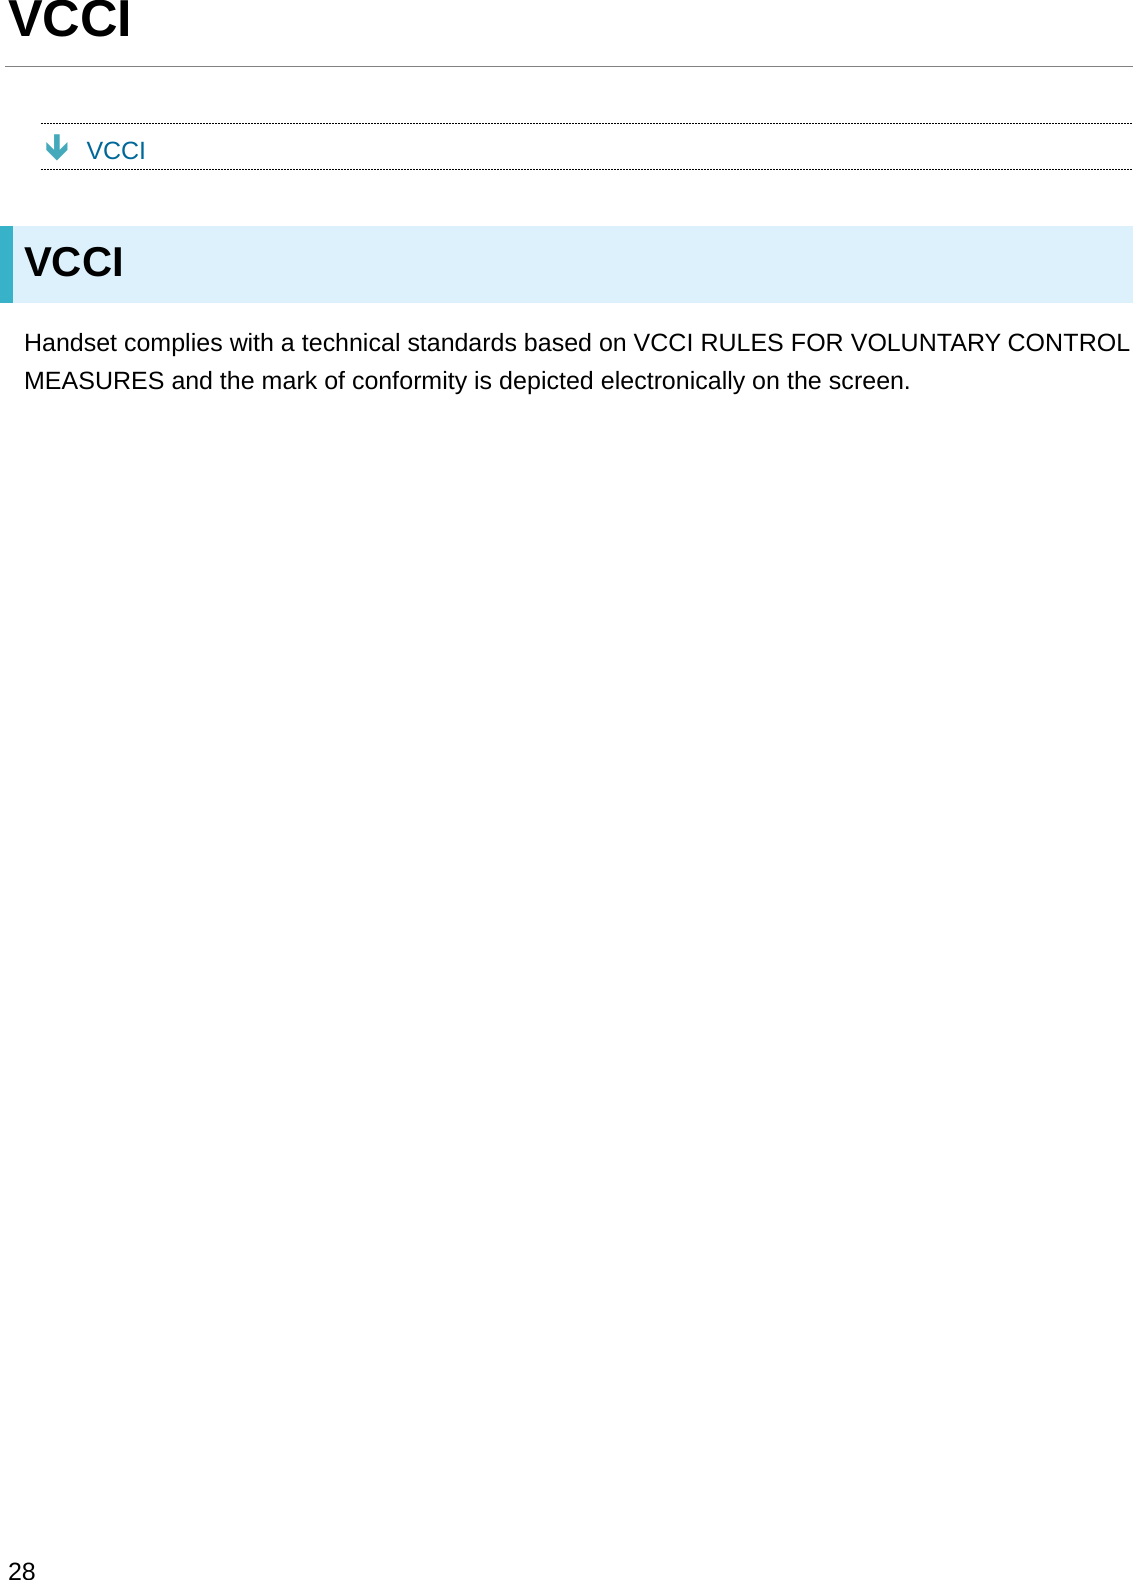 VCCIÐVCCIVCCIHandset complies with a technical standards based on VCCI RULES FOR VOLUNTARY CONTROL MEASURES and the mark of conformity is depicted electronically on the screen.28